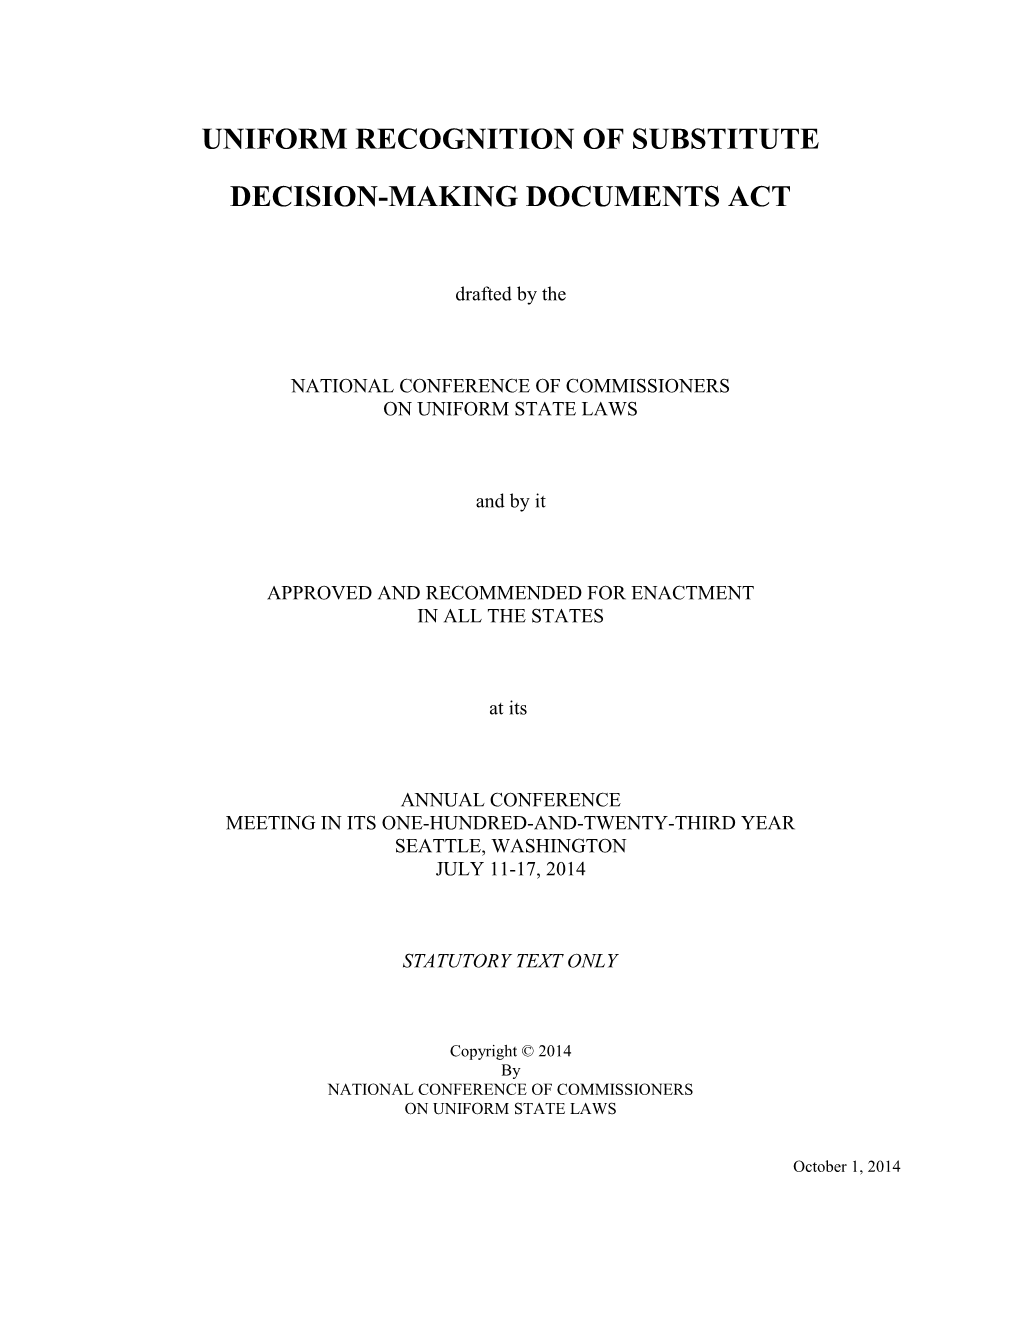 Decision-Making Documents Act